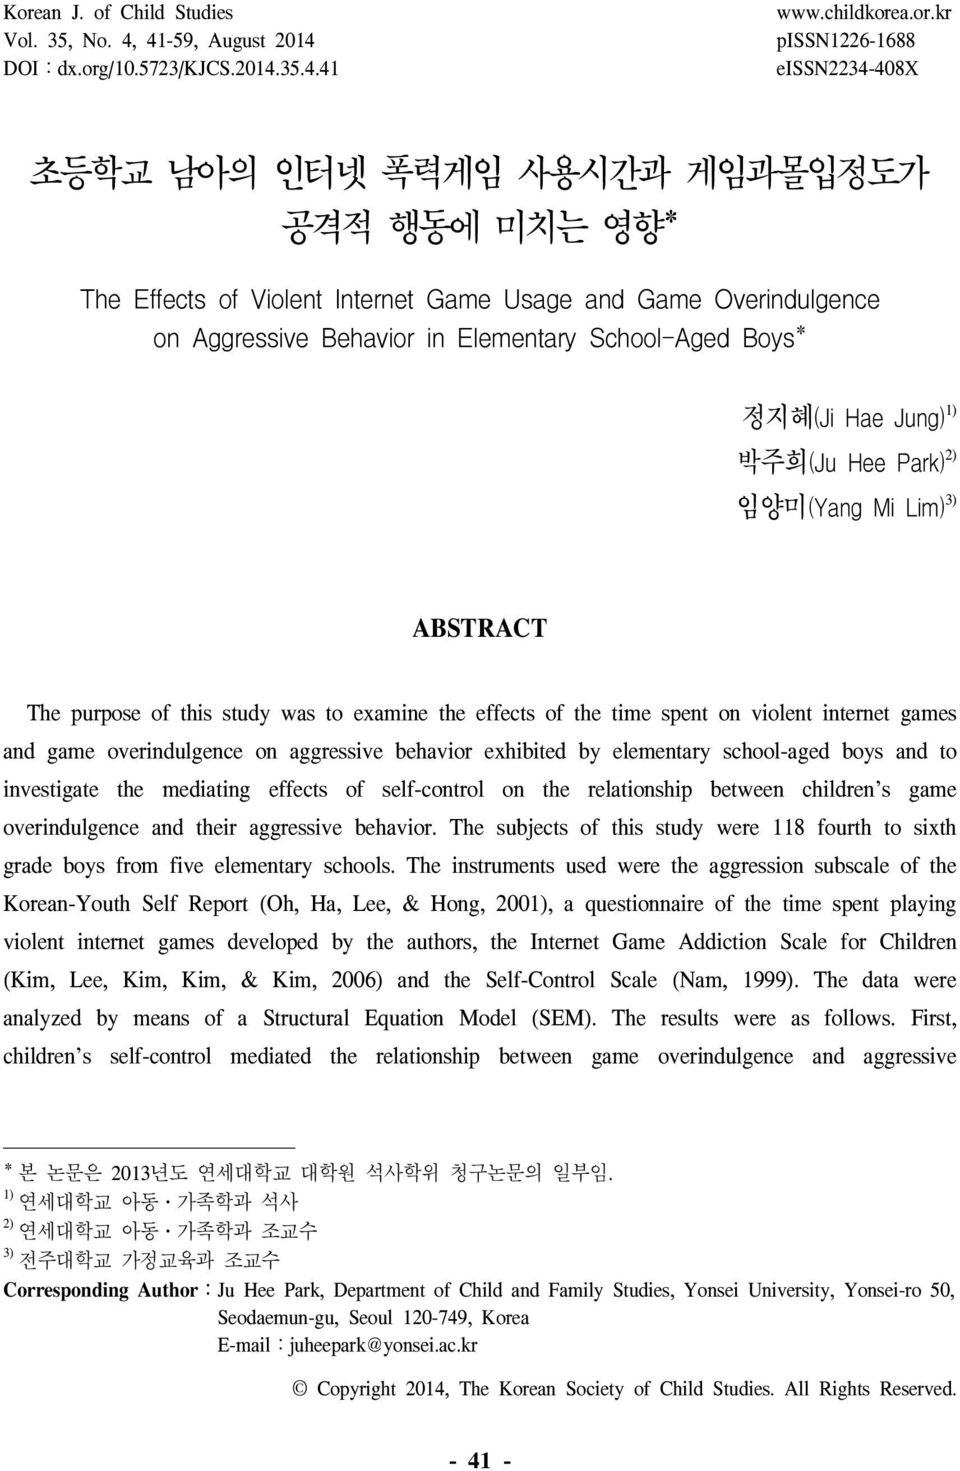 purpose of this study was to examine the effects of the time spent on violent internet games and game overindulgence on aggressive behavior exhibited by elementary school-aged boys and to investigate